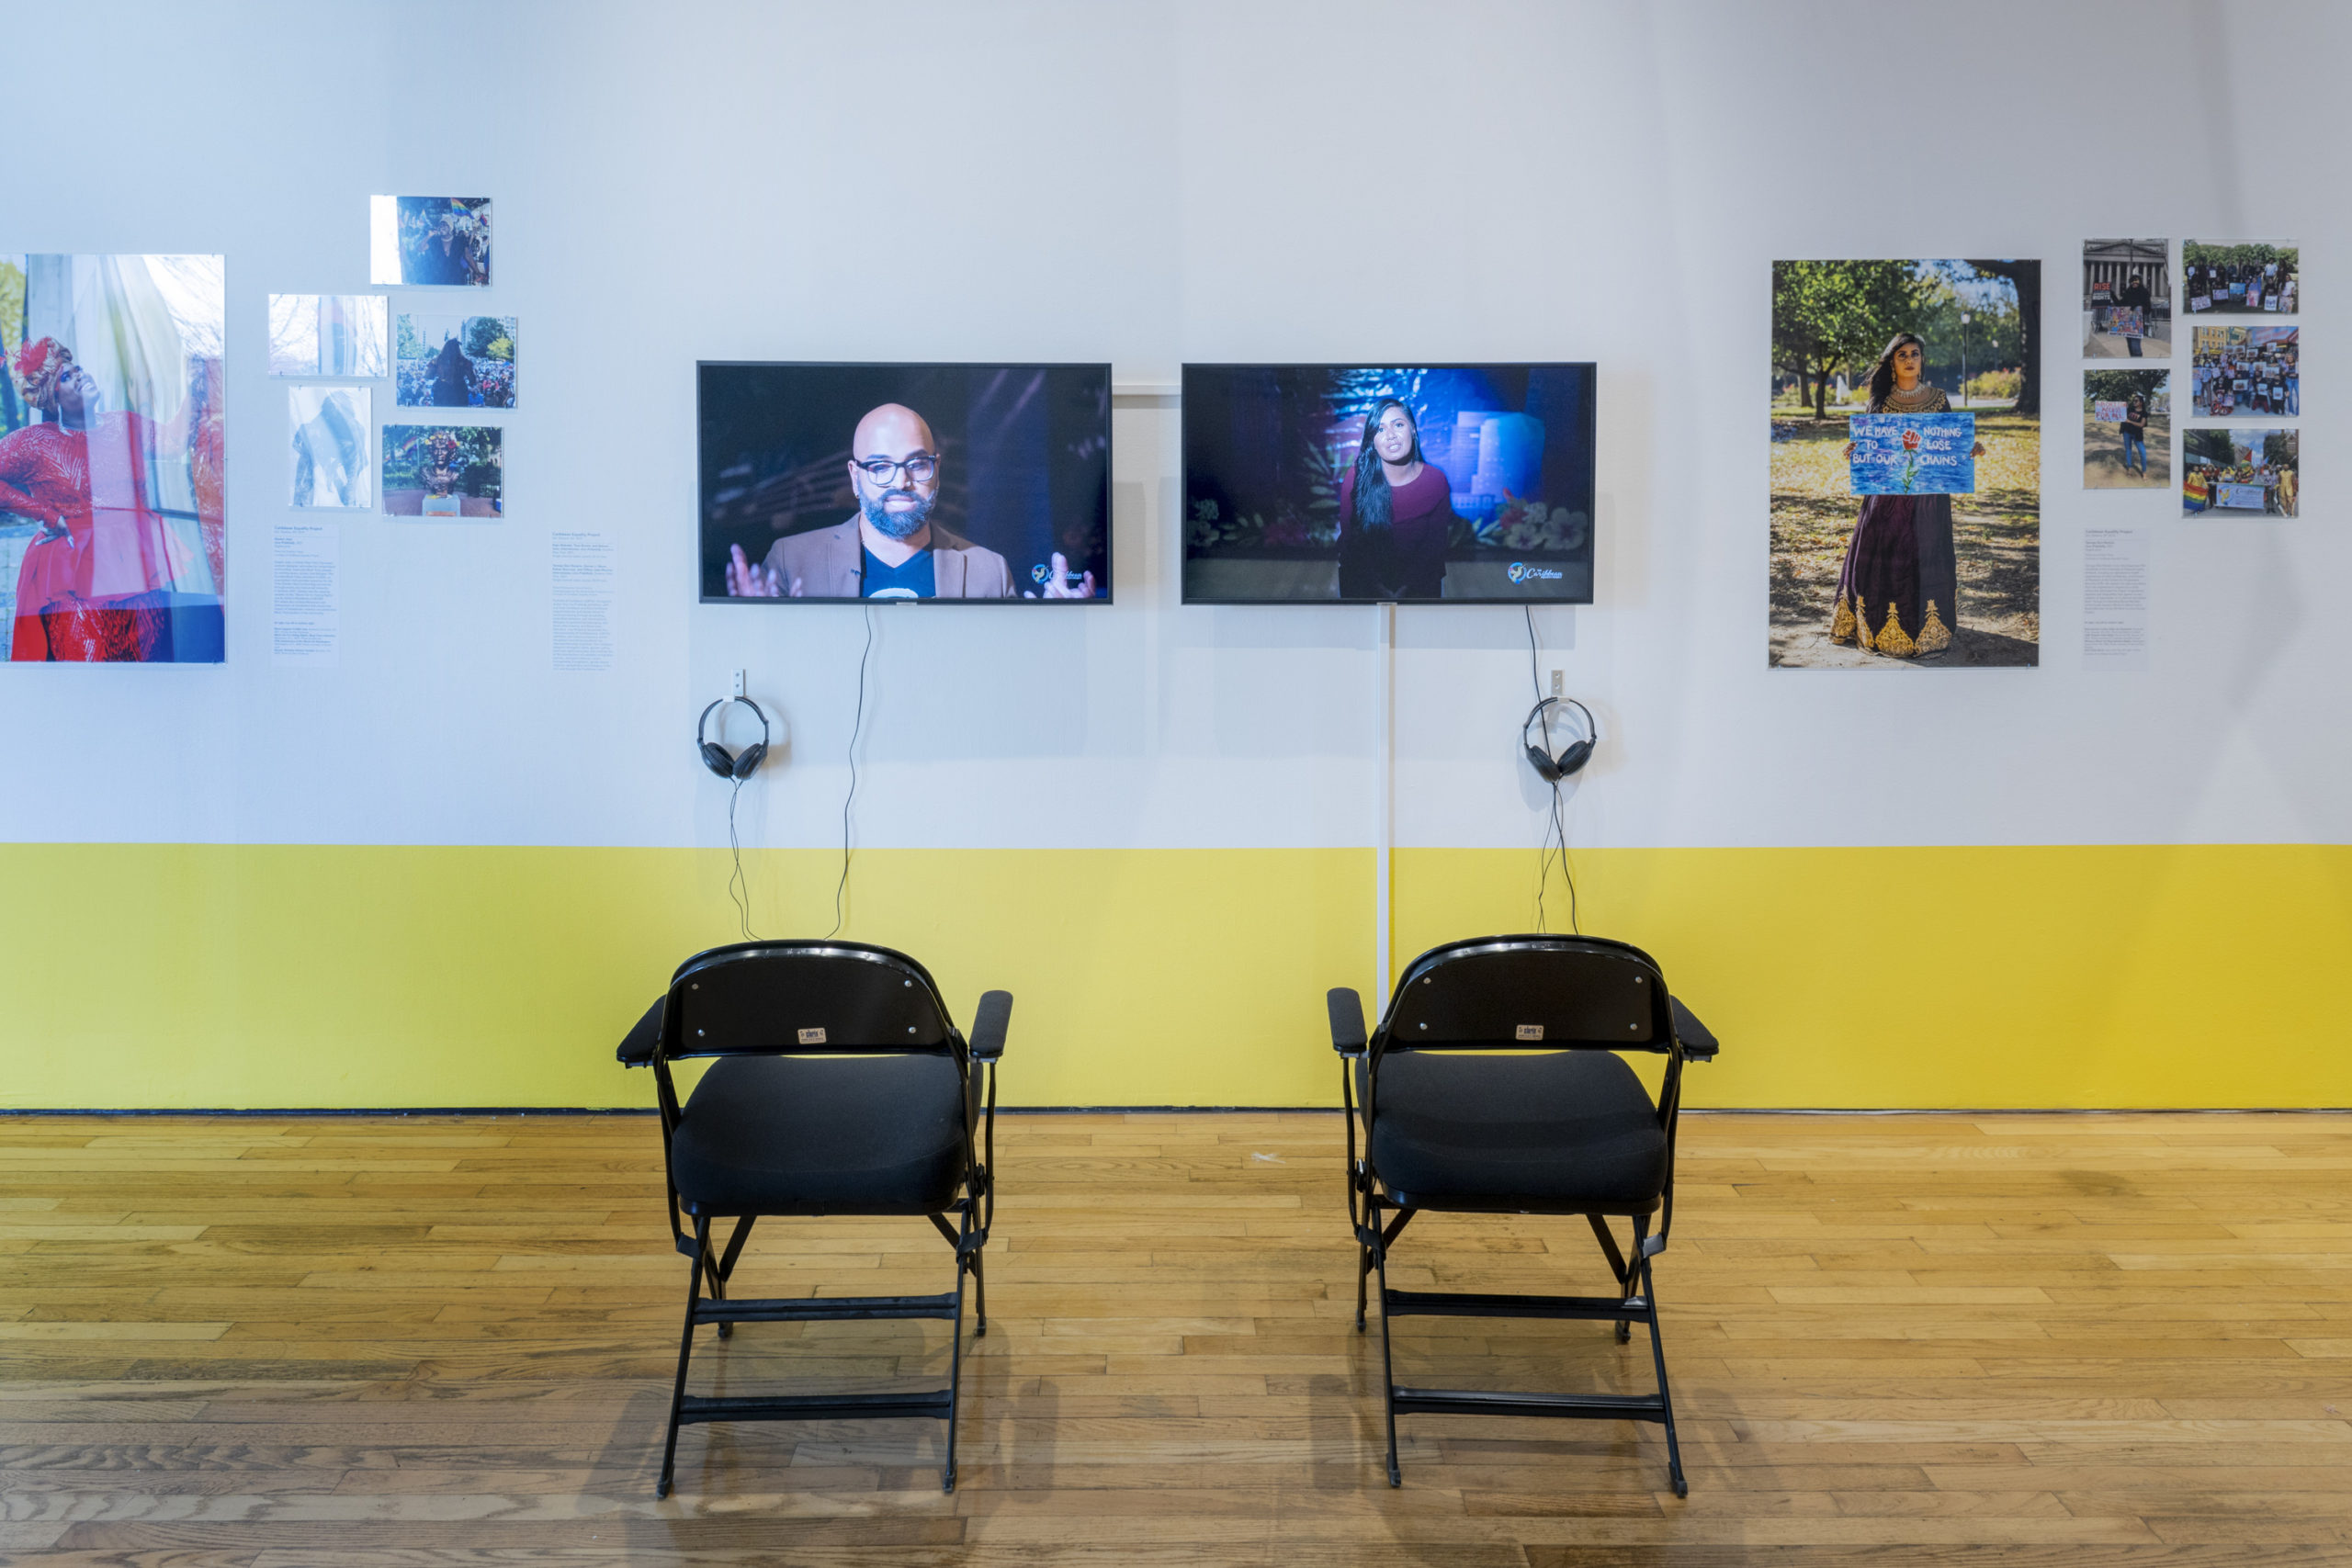 Two black chairs placed in front of an exhibition wall. The exhibition wall is white with a yellow strip at the bottom. In the center, two screens with headphones have been installed. The screens are displaying two speakers. Framing the monitors is community member portraits and photographs of community events from The Caribbean Equality Project.